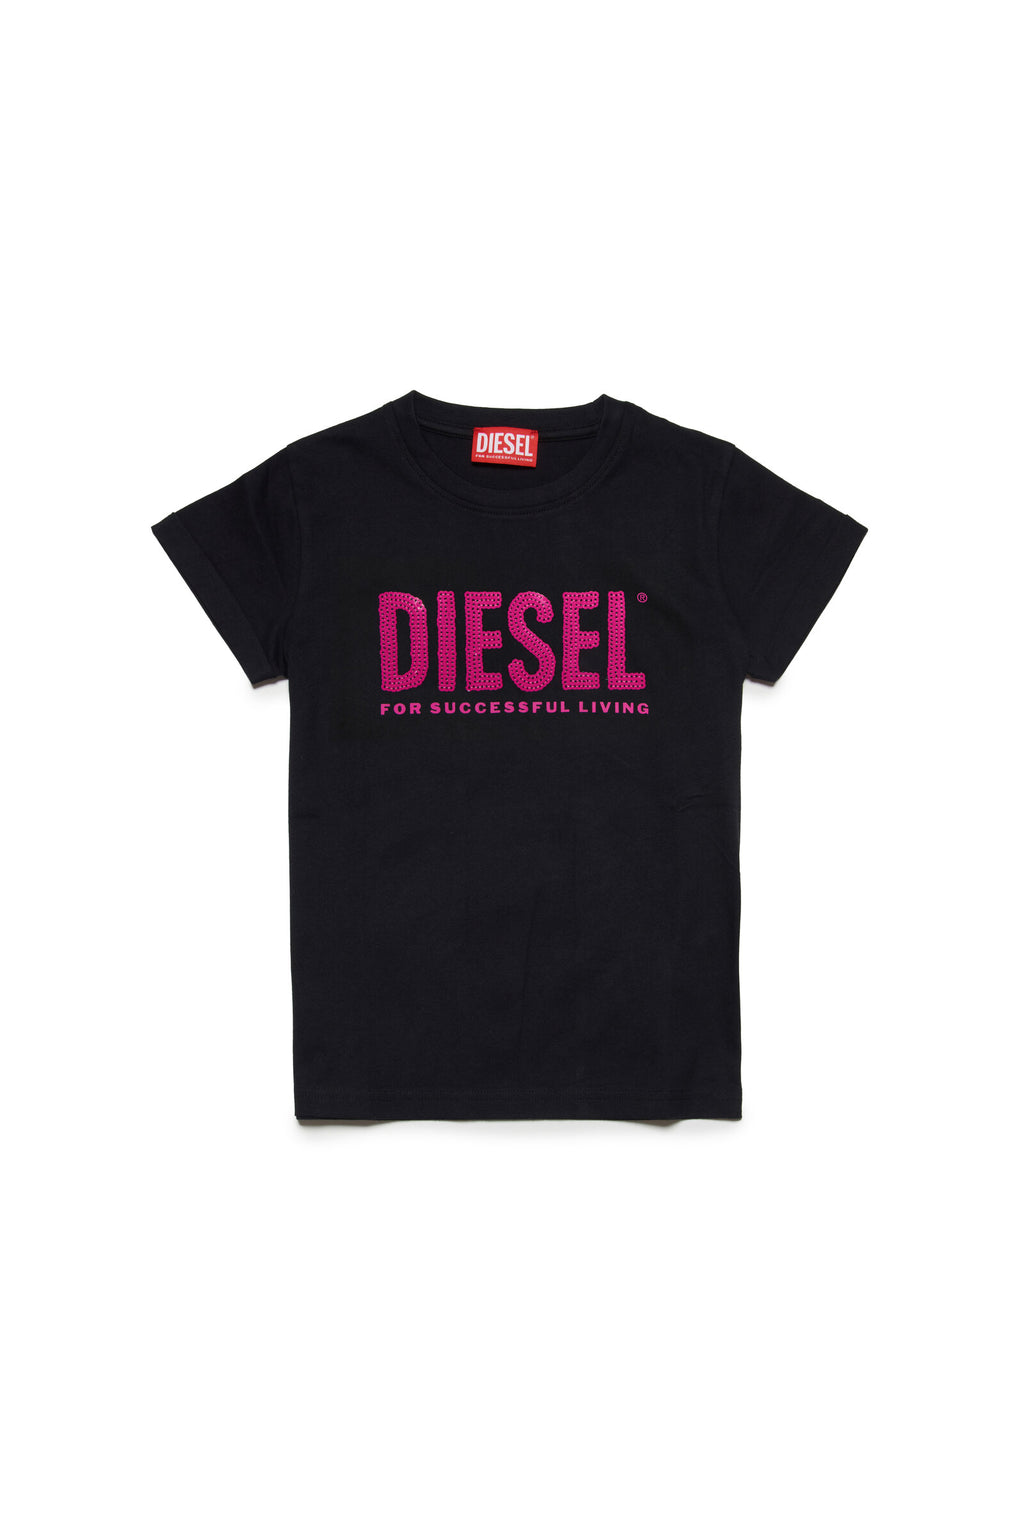 Black t-shirt with sequined Diesel logo